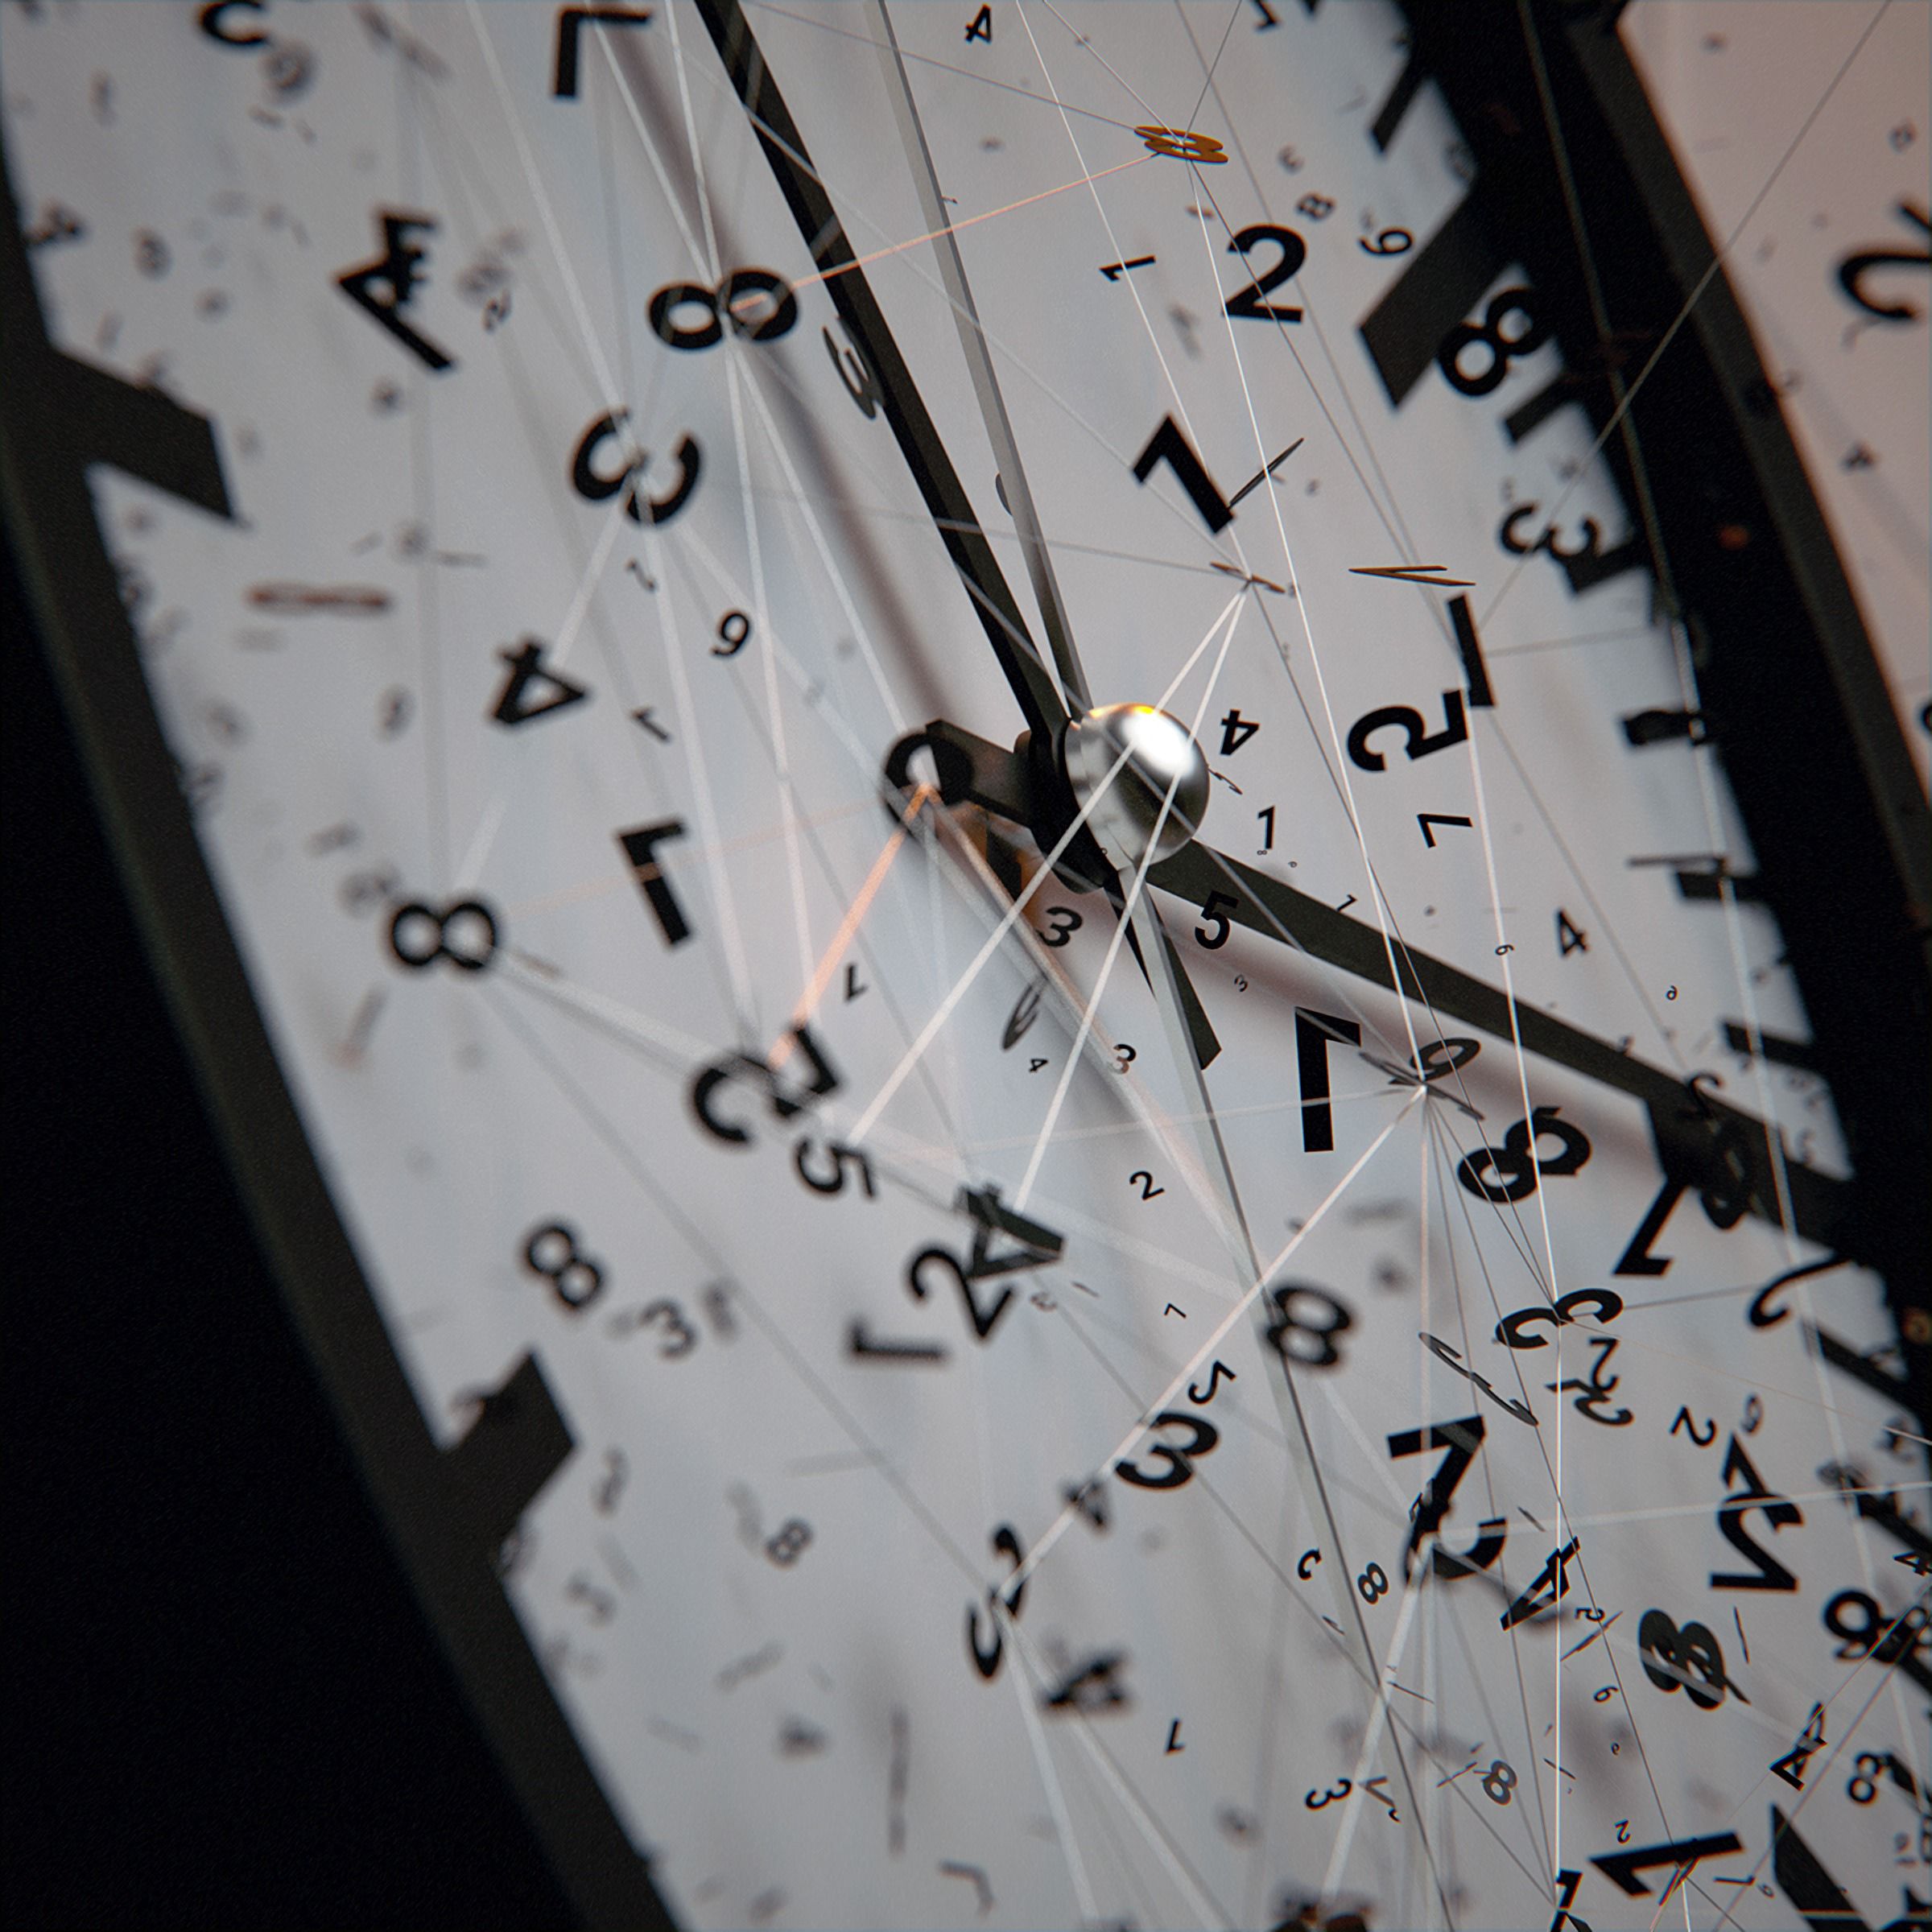 miscellanea, numbers, clock face, clock, dial, intricate, miscellaneous, lines, confused, arrows Smartphone Background